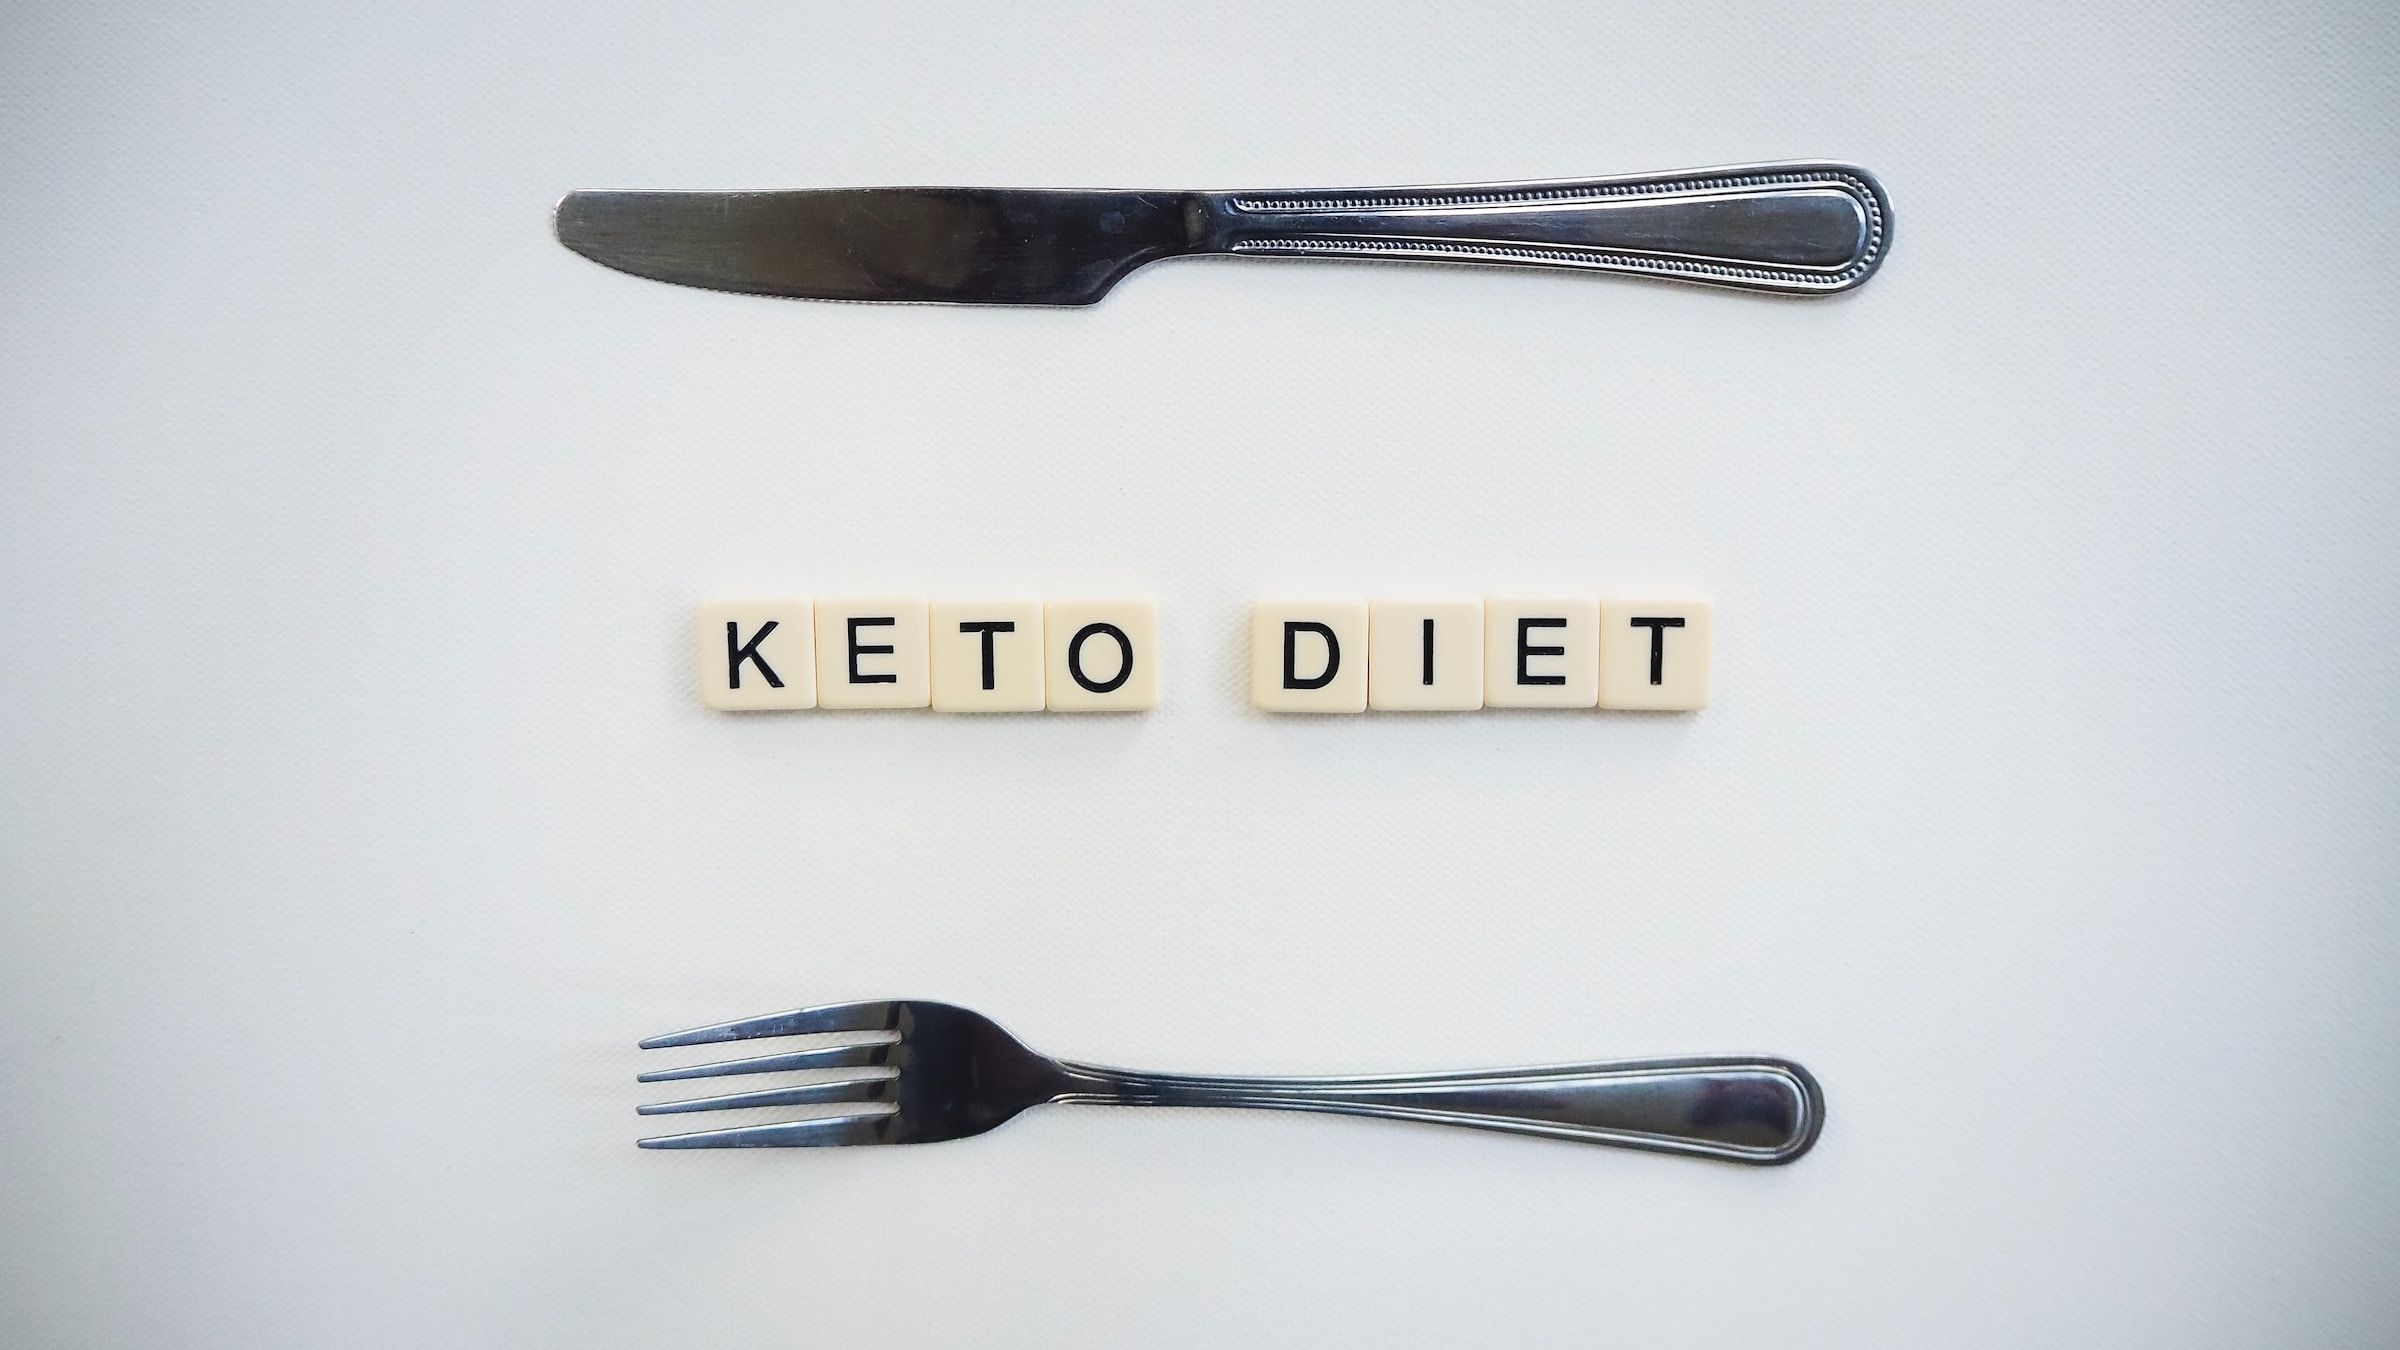 keto diet picture knife and fork word block